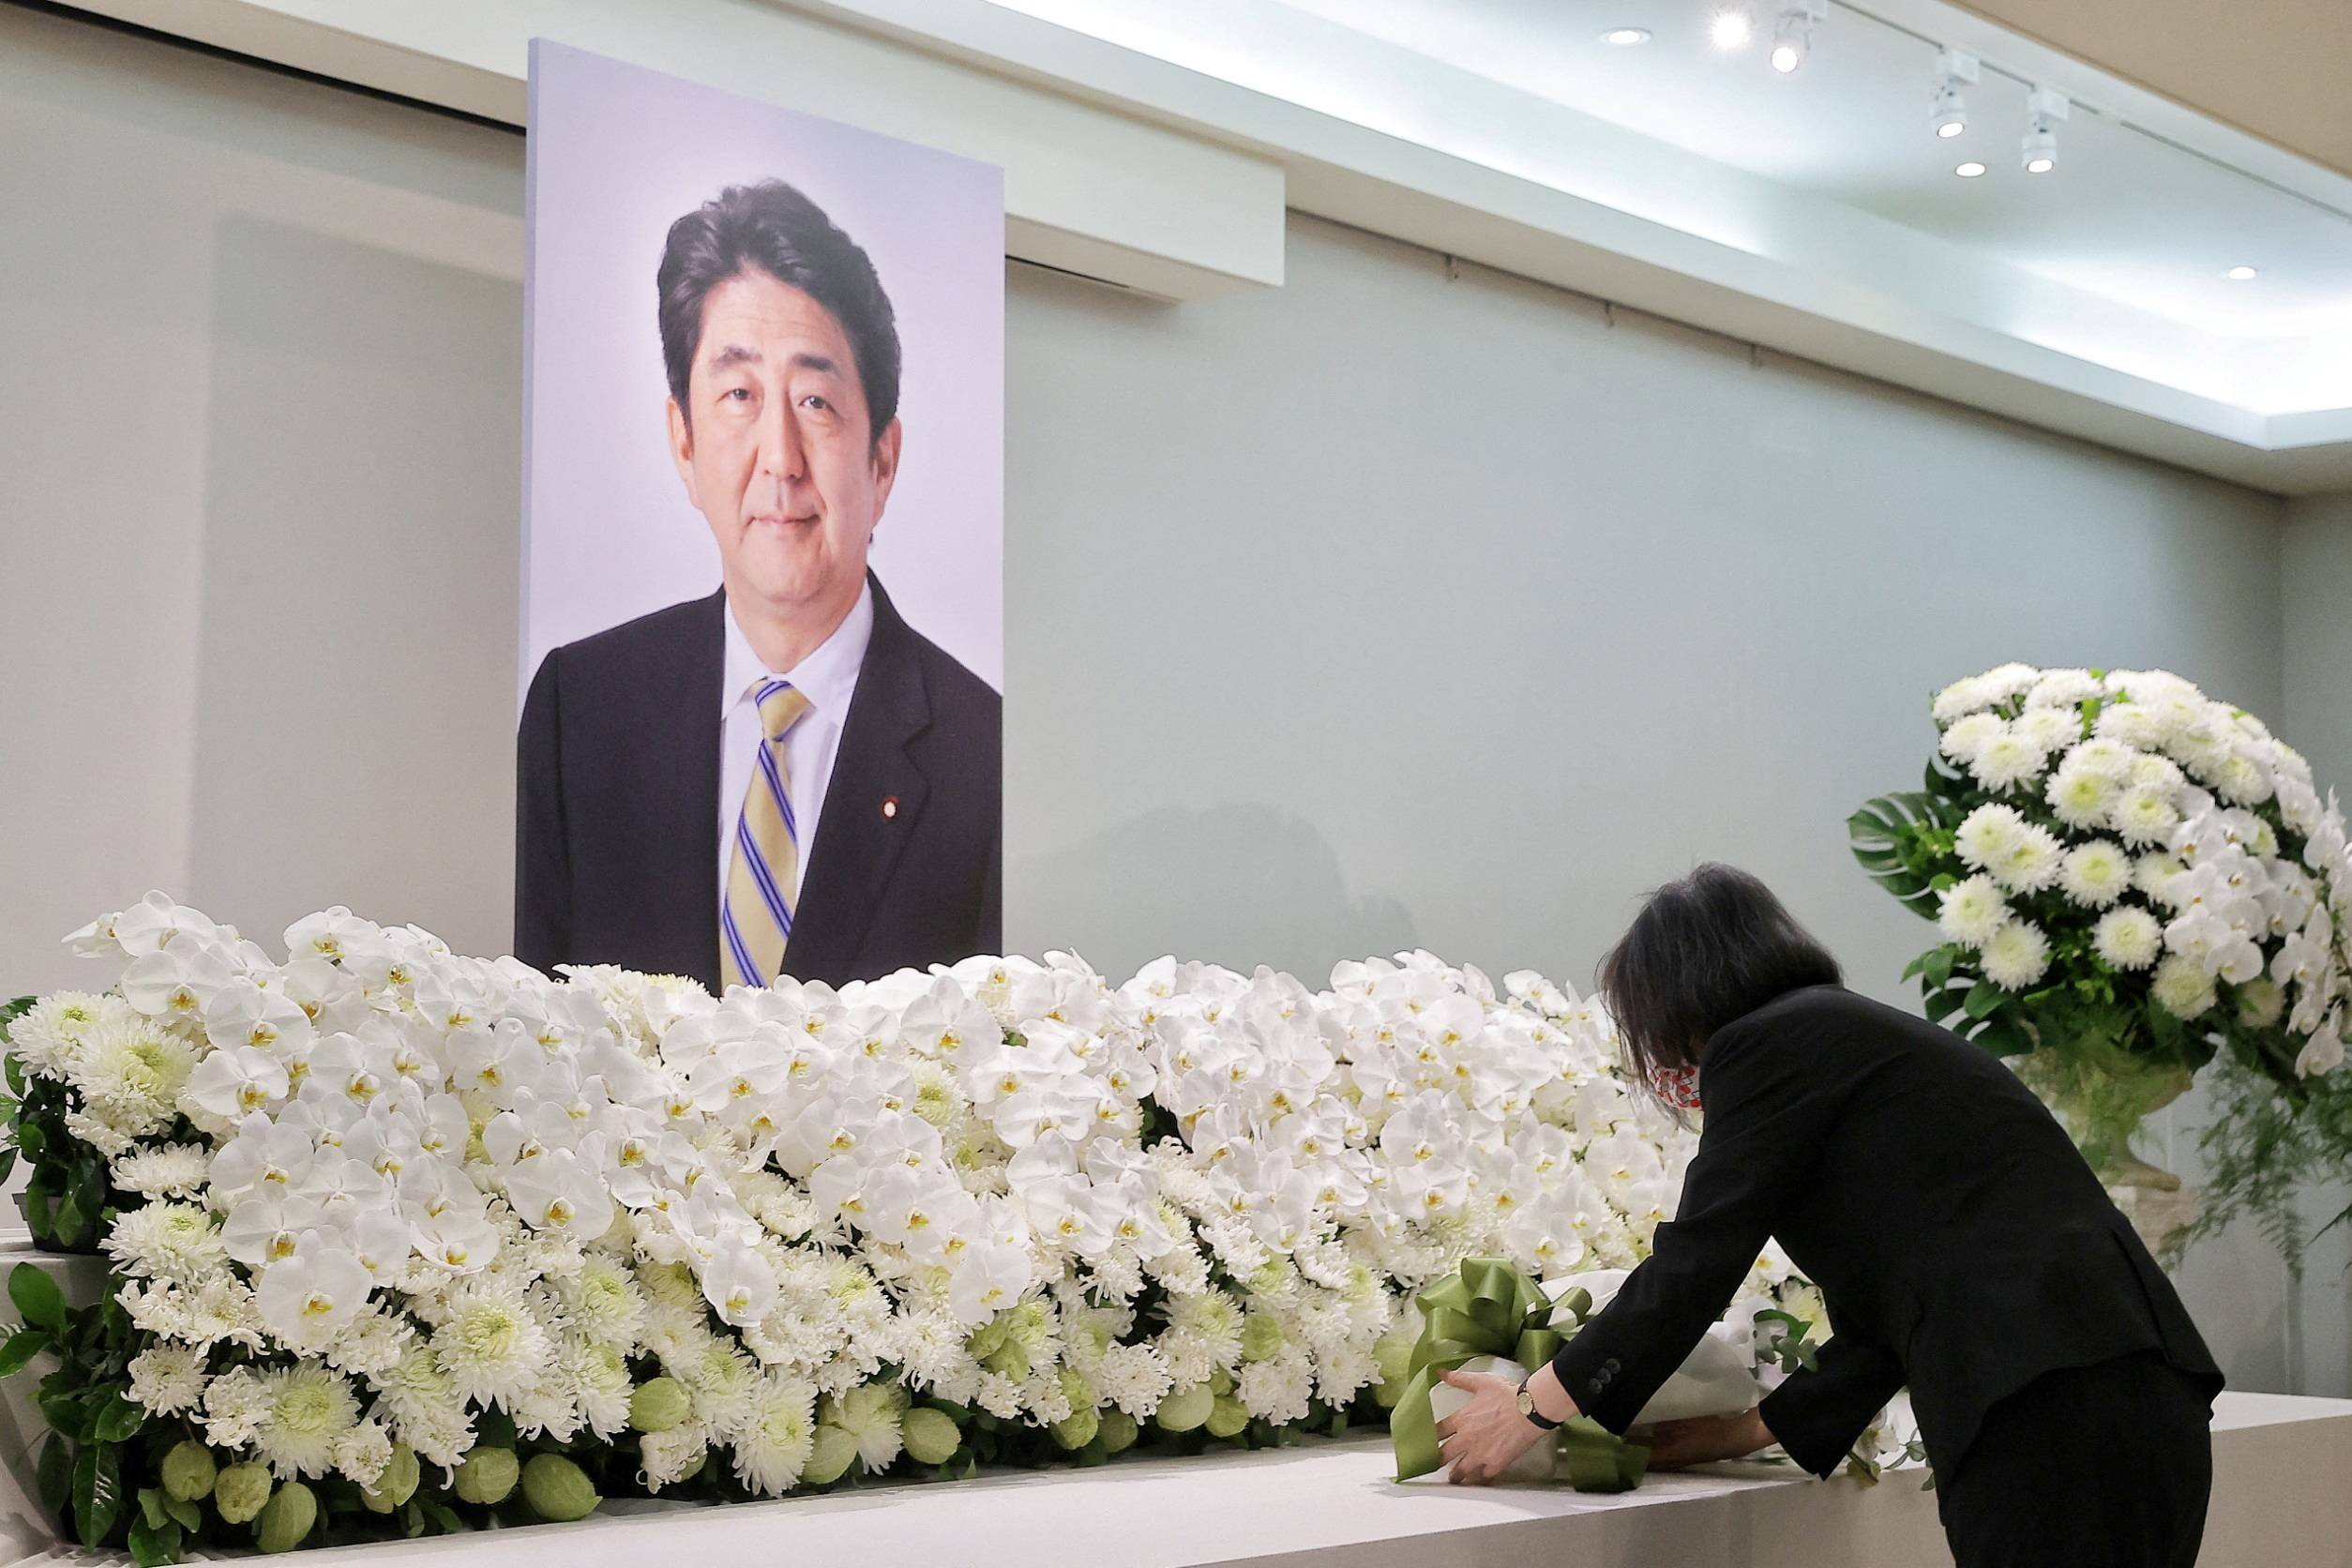 Taiwanese President Tsai Ing-wen lays flowers in front of a portrait of former Japanese Prime Minister Shinzo Abe at the Japan-Taiwan Exchange Association office in Taipei on July 11. | TAIWAN PRESIDENTIAL OFFICE / VIA REUTERS